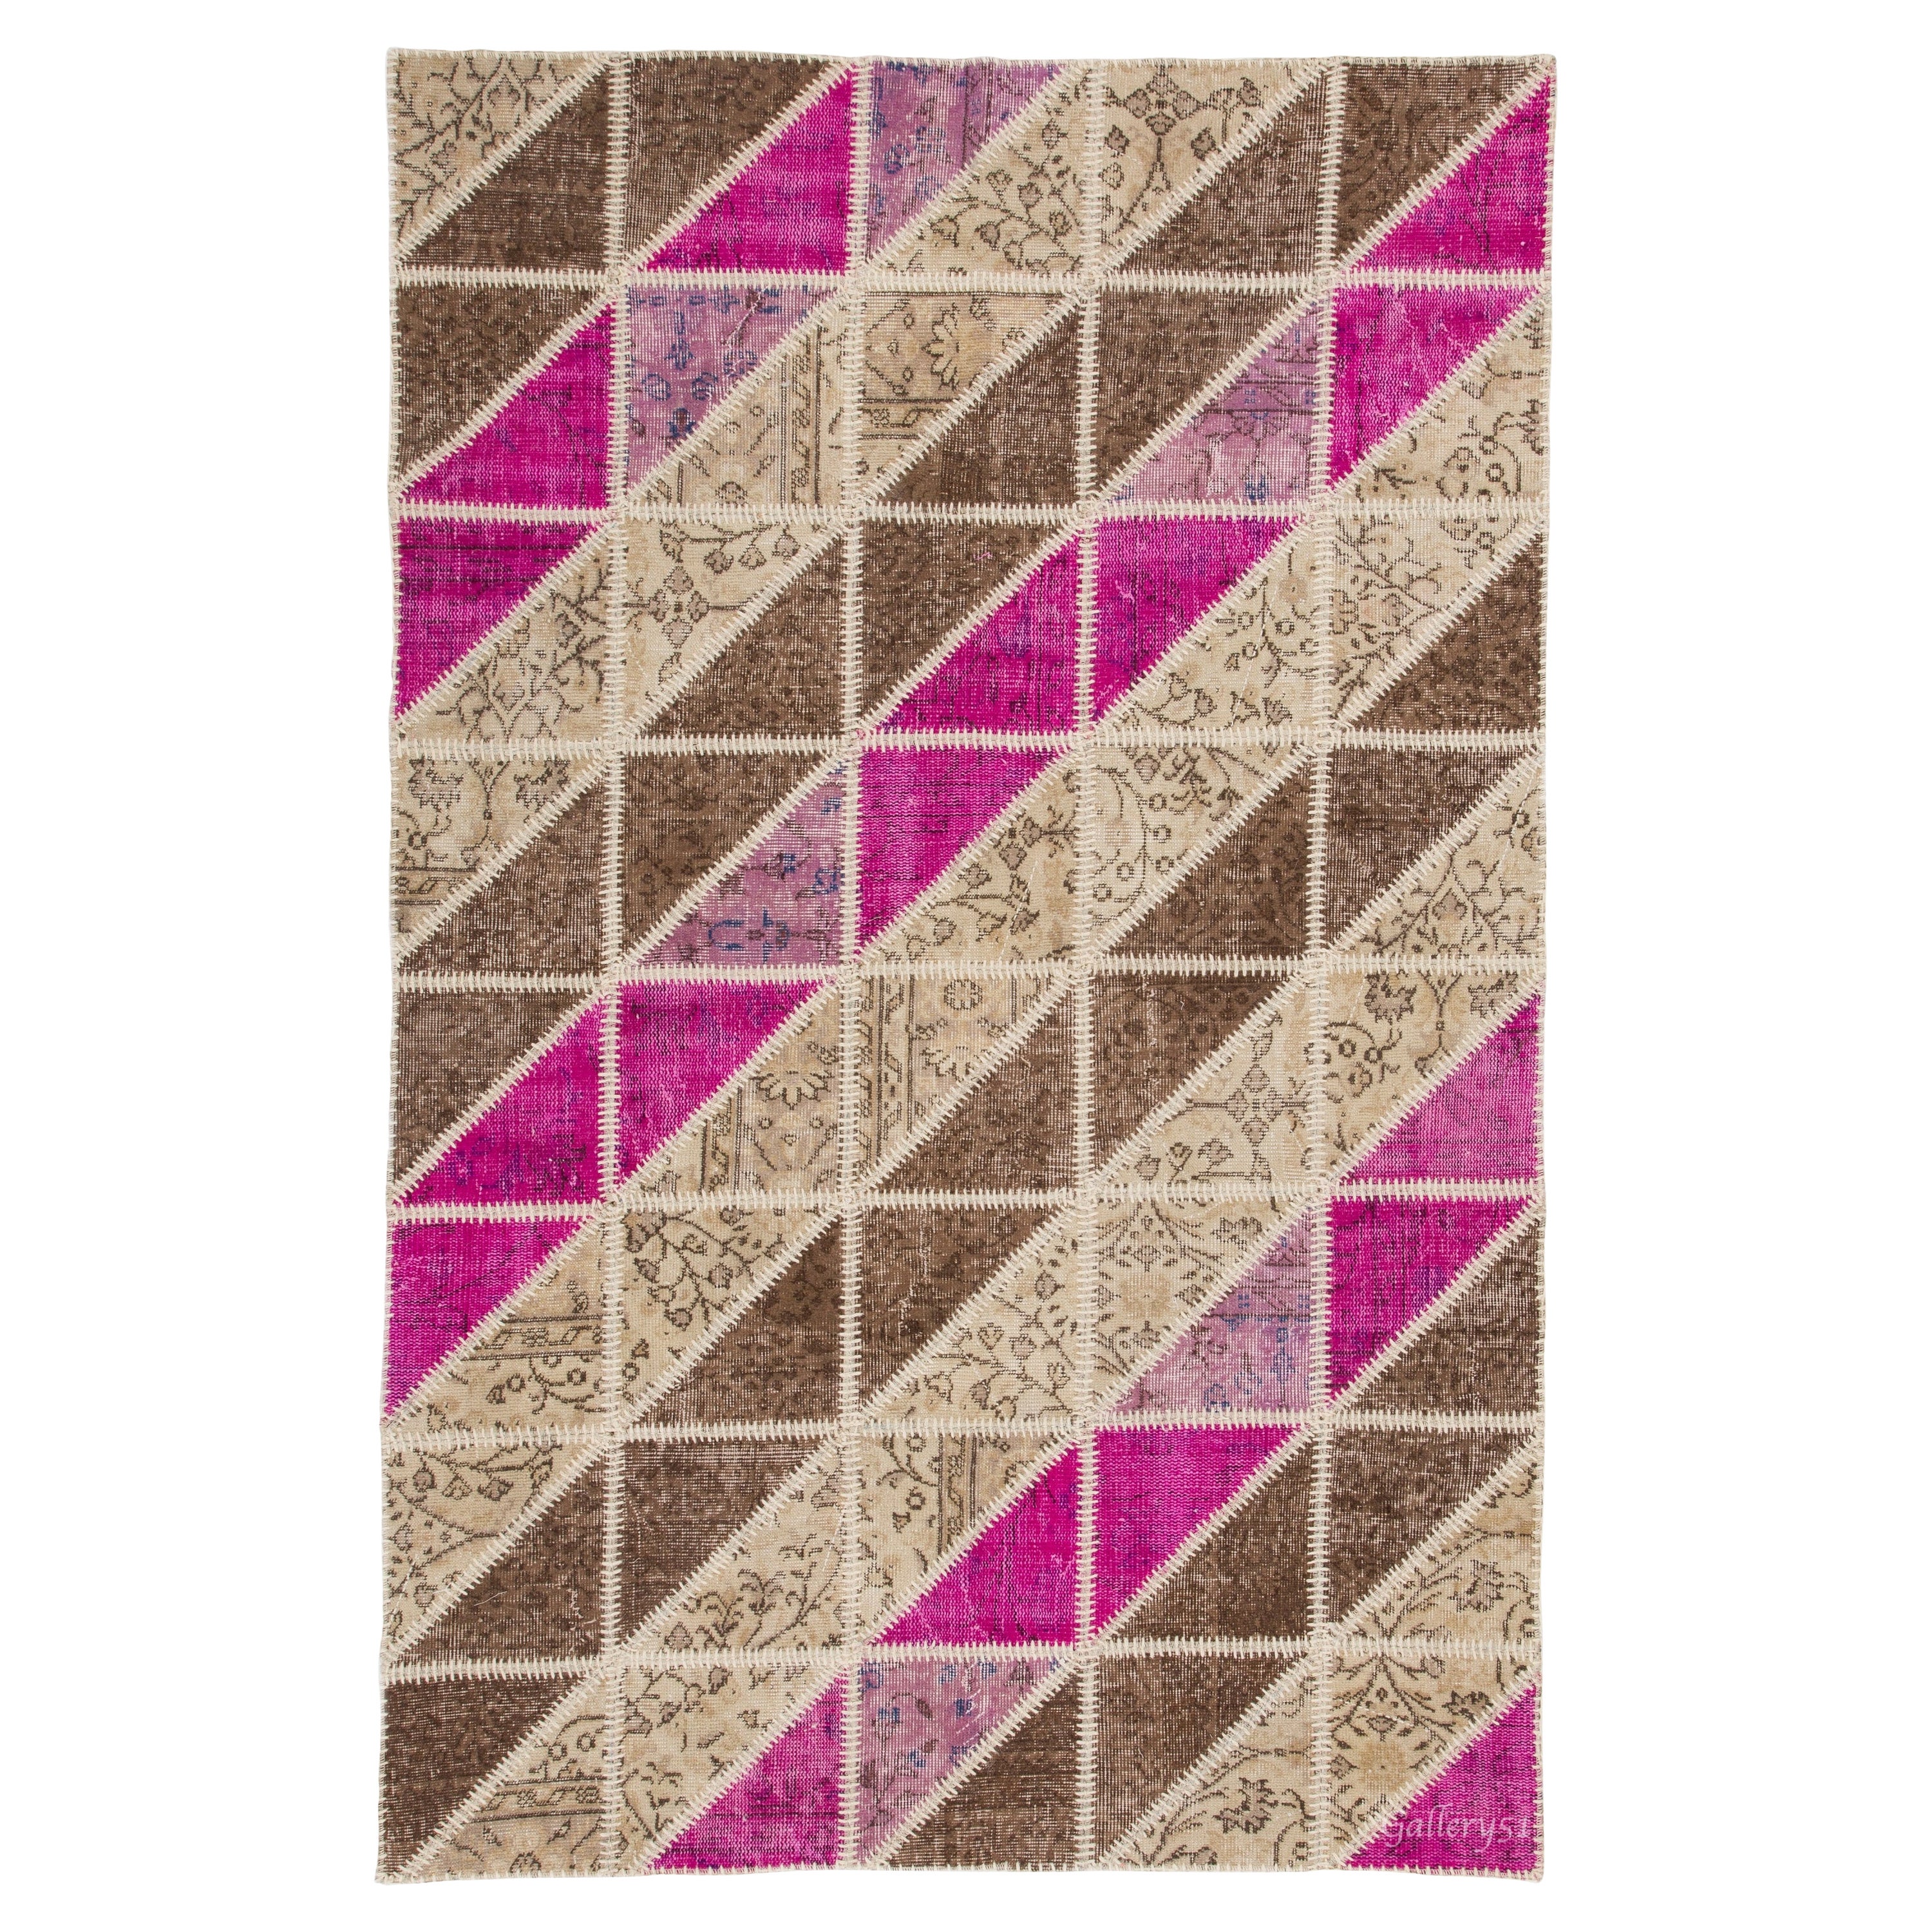 Contemporary Turkish Patchwork Rug. Handmade from Over-Dyed Vintage Carpets For Sale